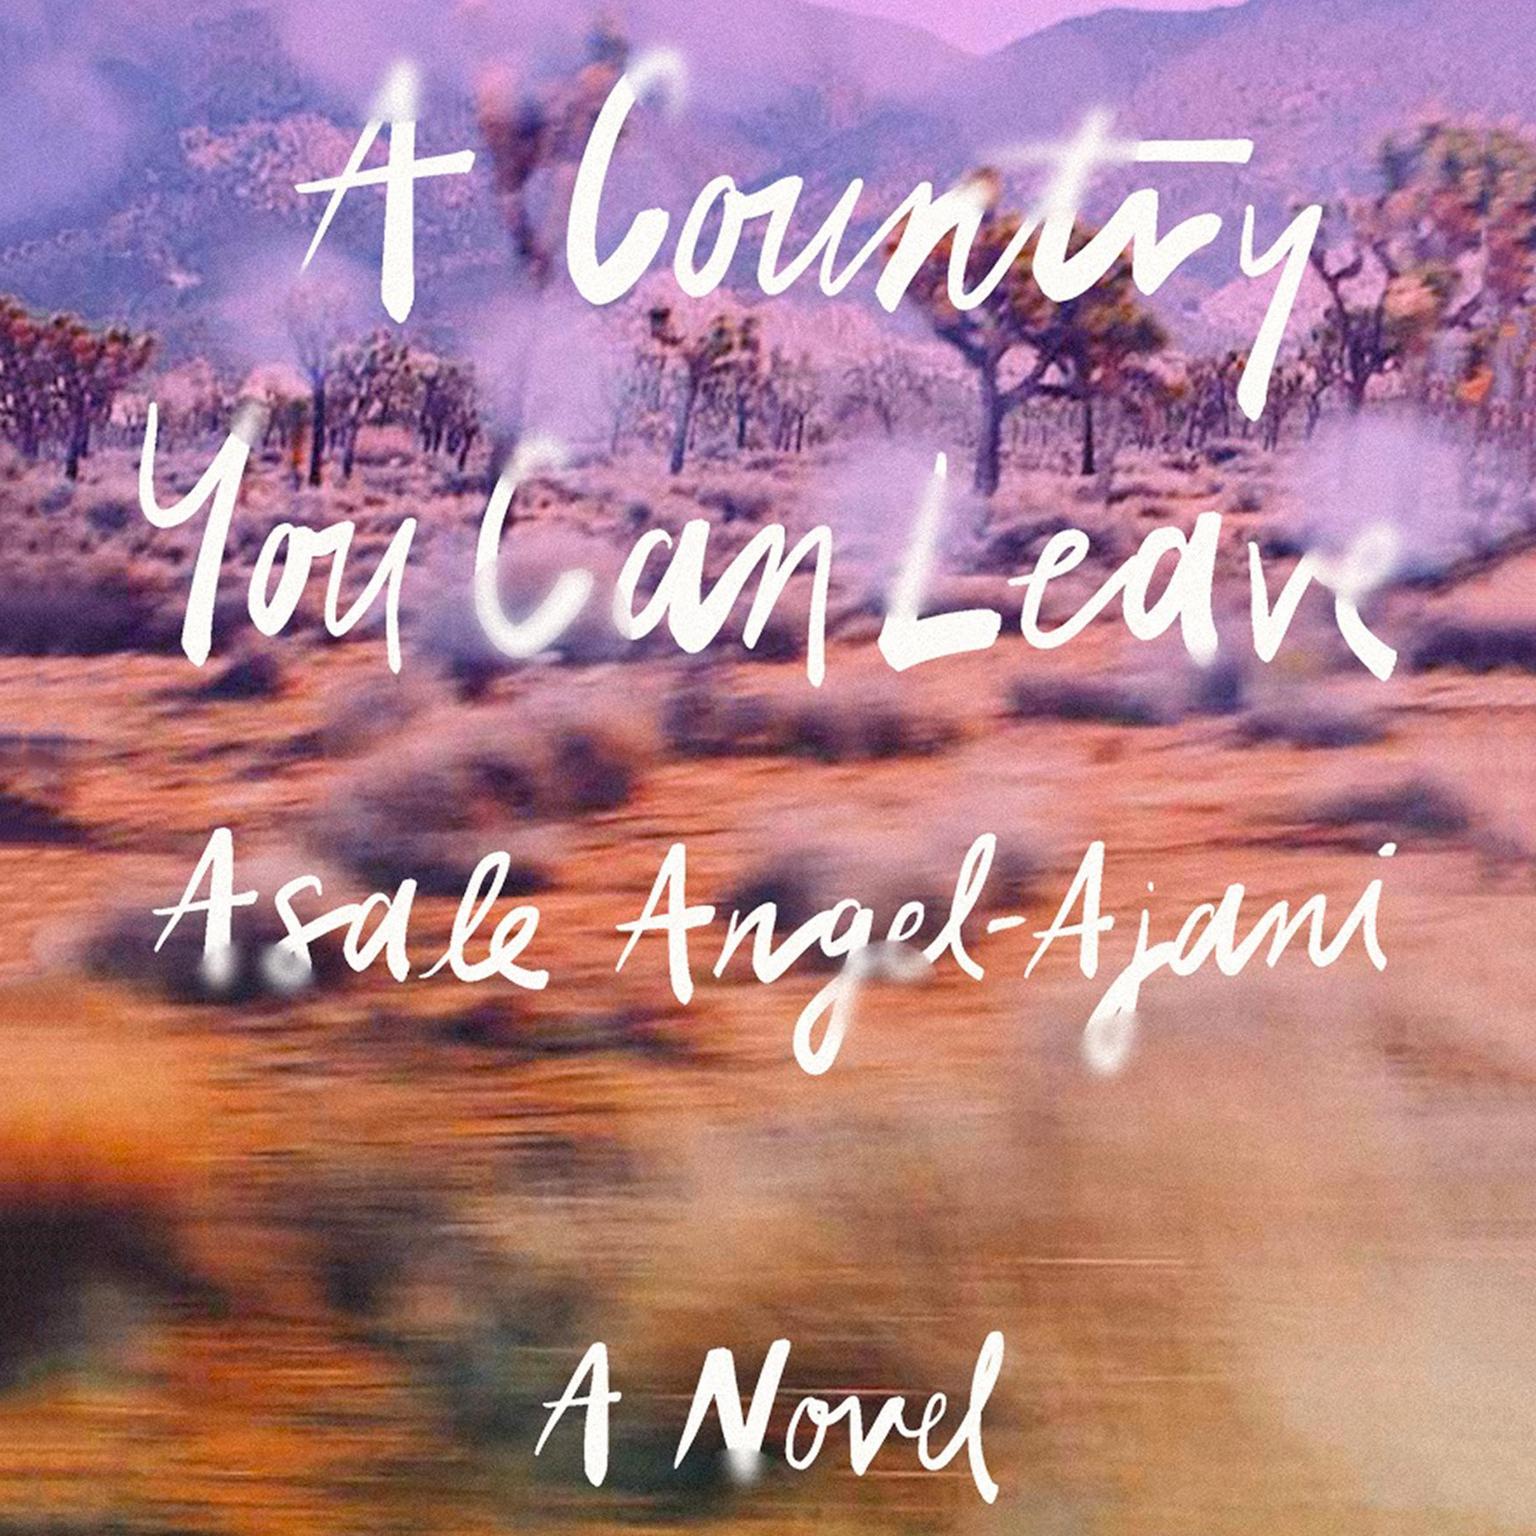 A Country You Can Leave: A Novel Audiobook, by Asale Angel-Ajani